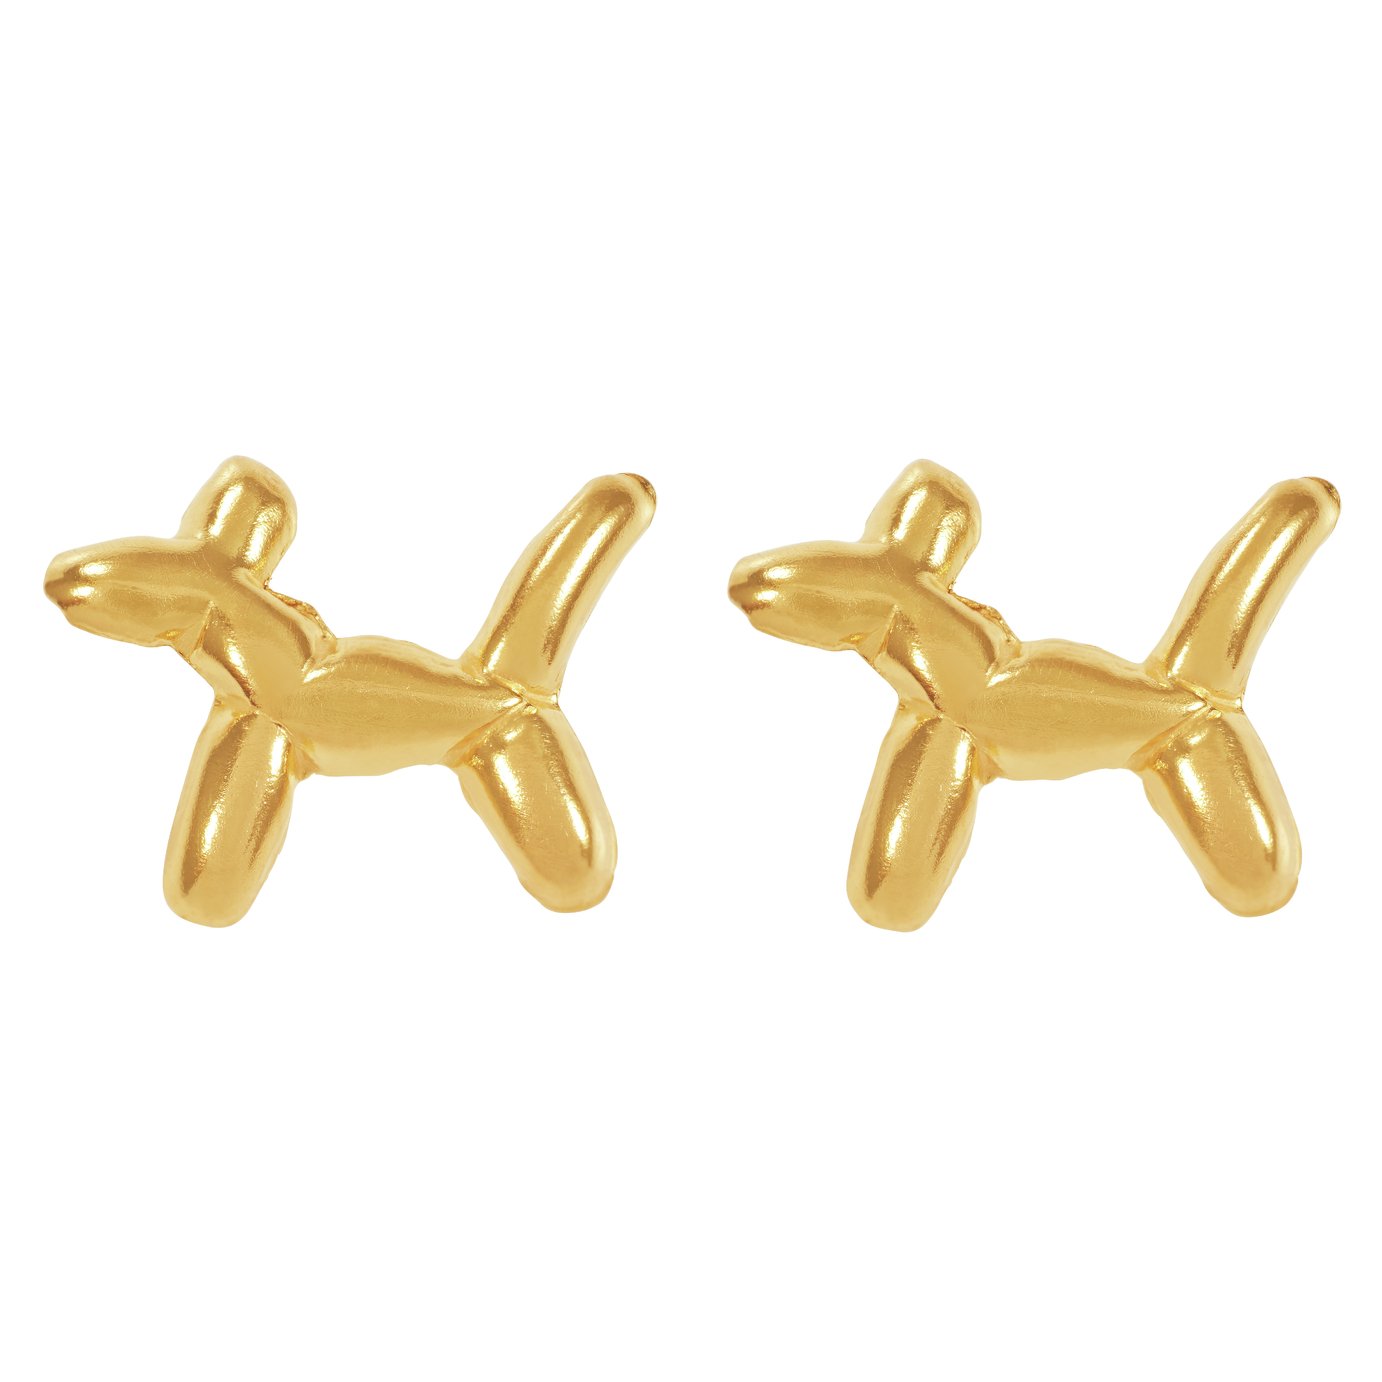 Revere 9ct Gold Plated Dog Stud Earrings Review